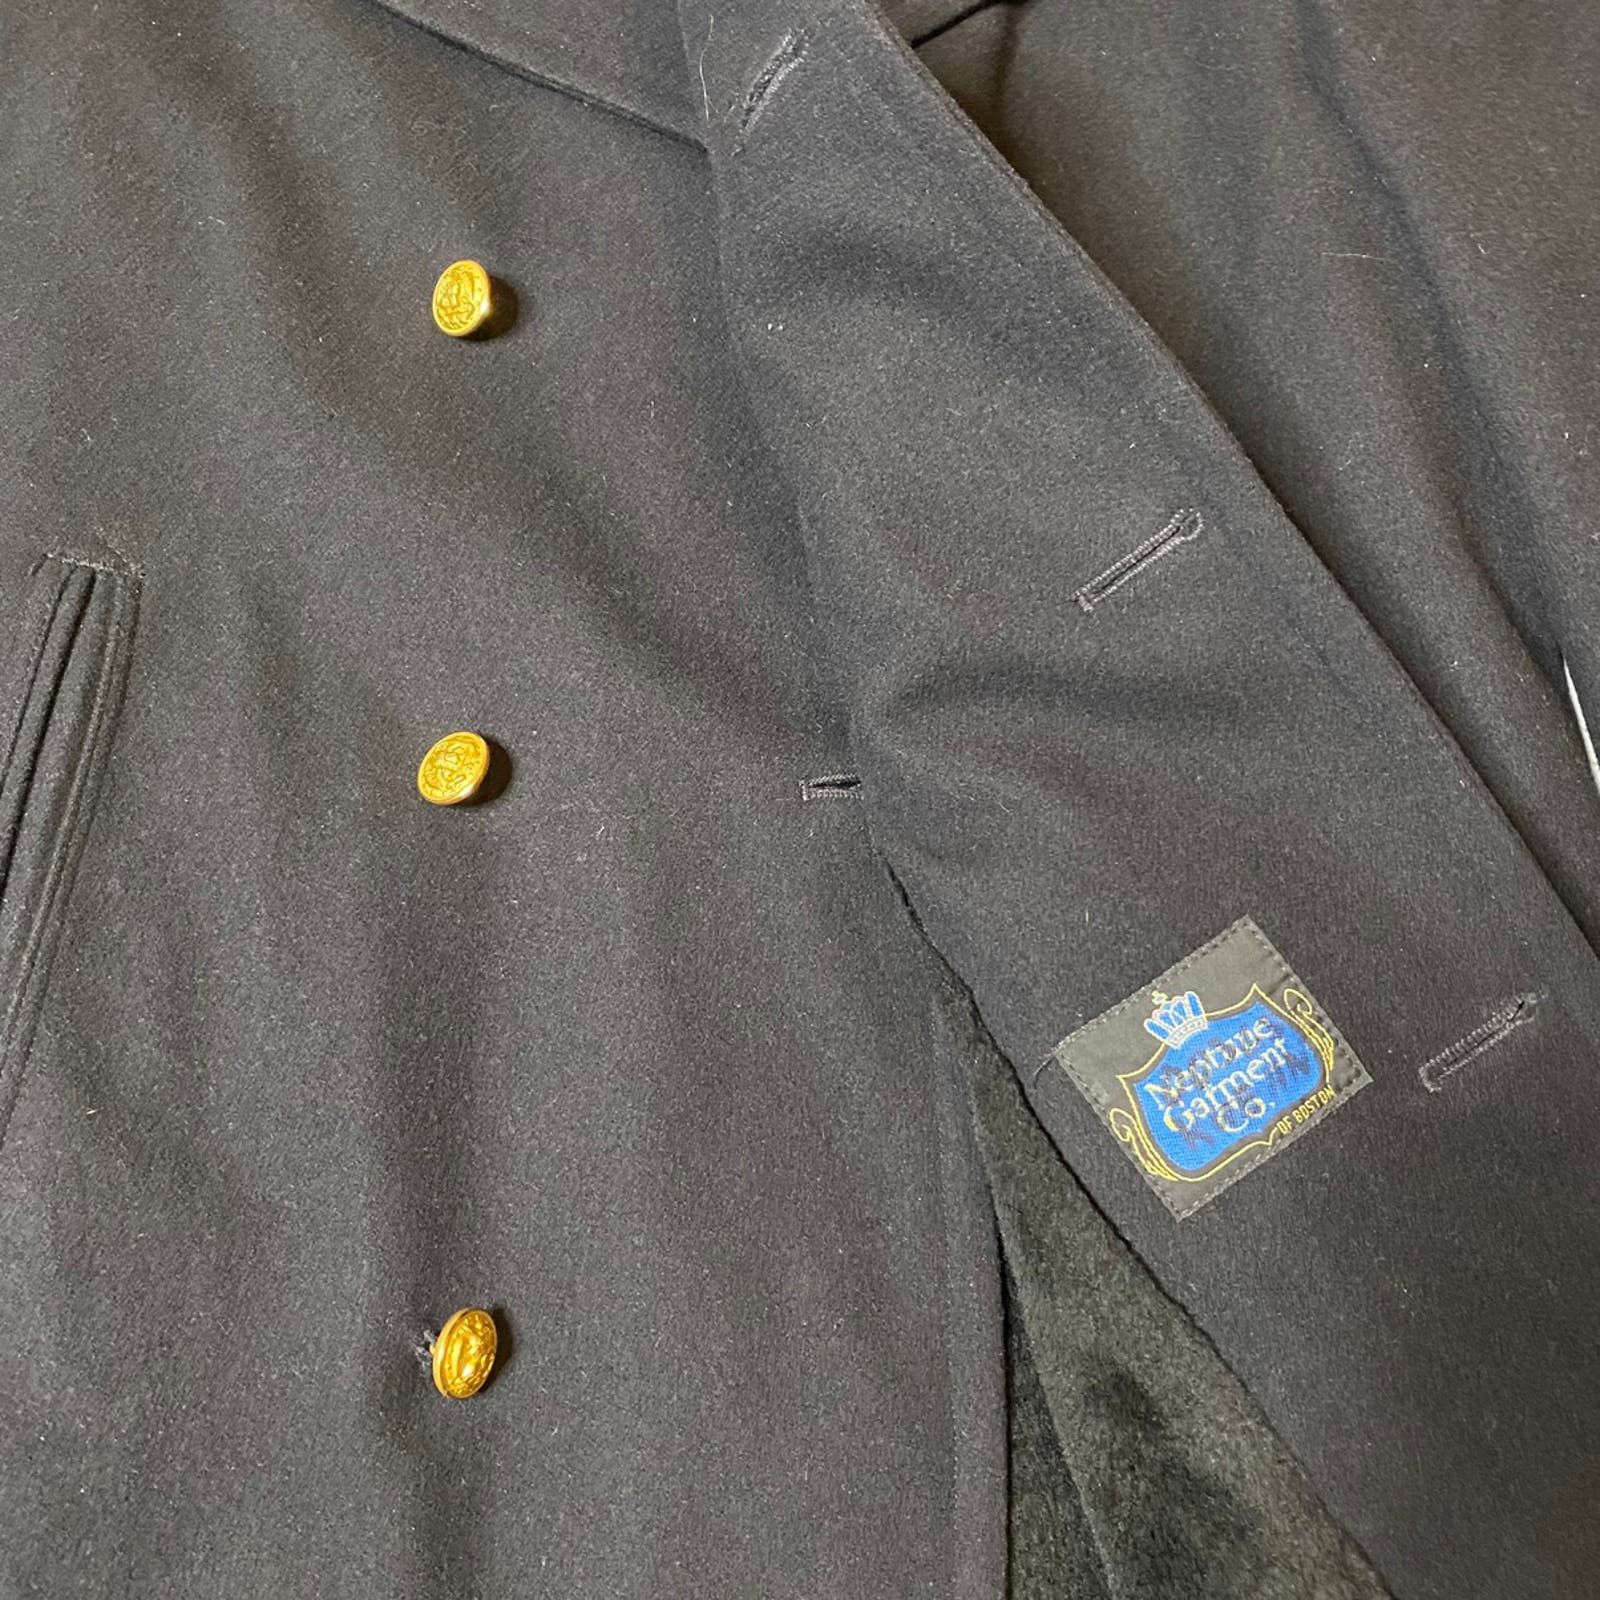 Other Neptune Garment Co Black Wool Military Pea Coat Size Small Size US S / EU 44-46 / 1 - 5 Thumbnail